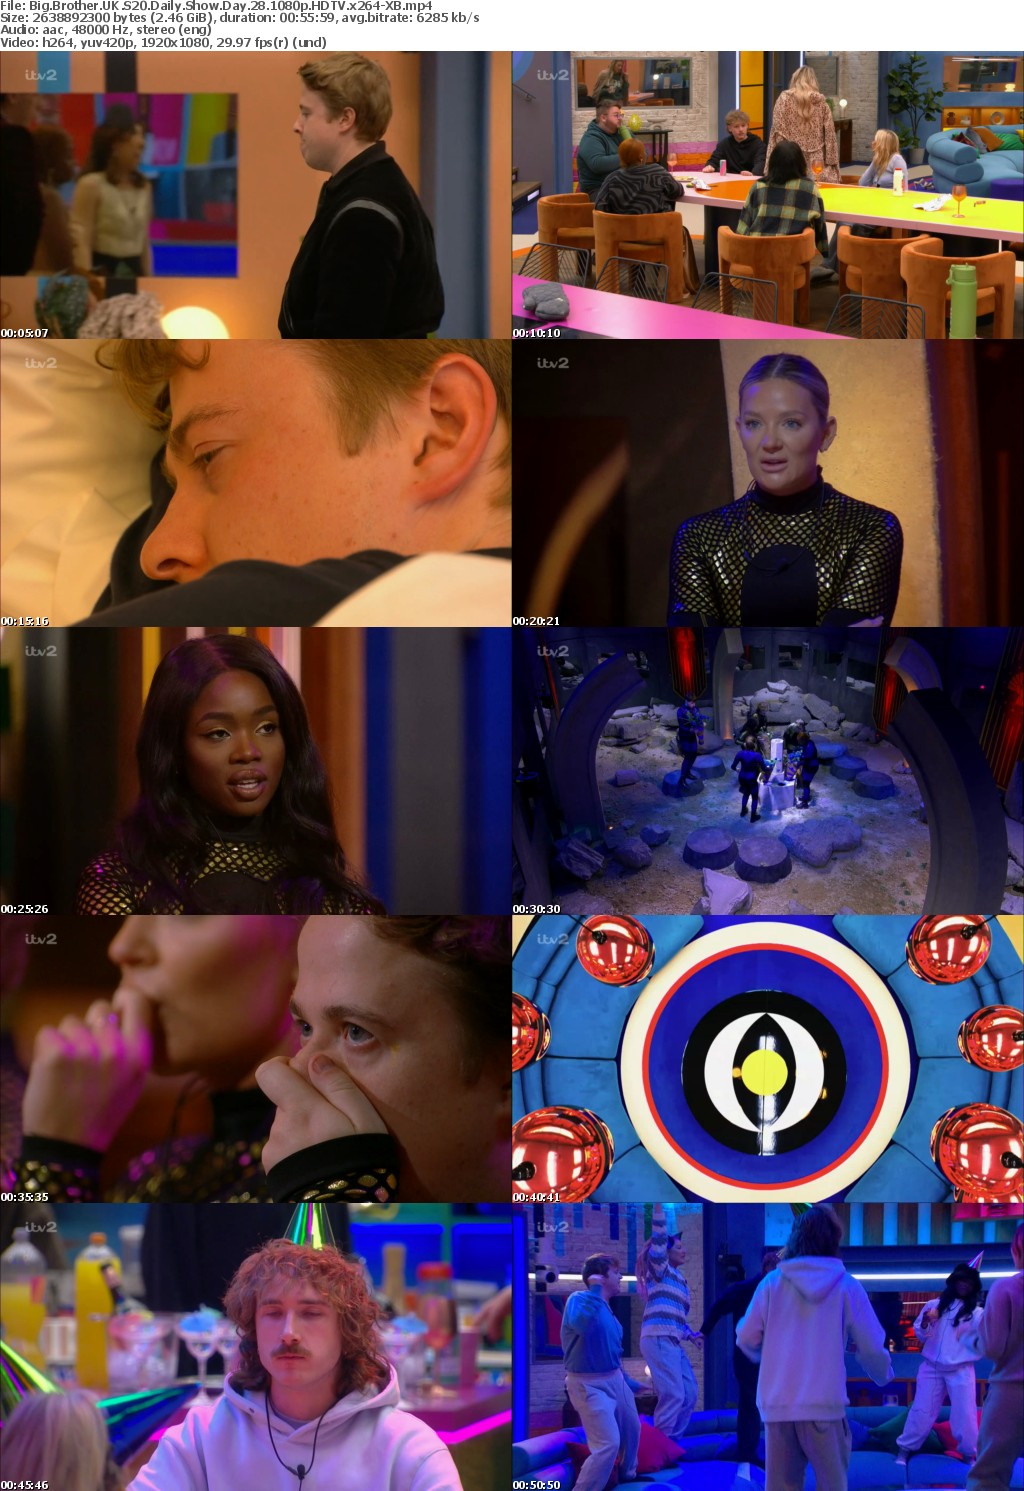 Big Brother UK S20 Daily Show Day 28 1080p HDTV x264-XB